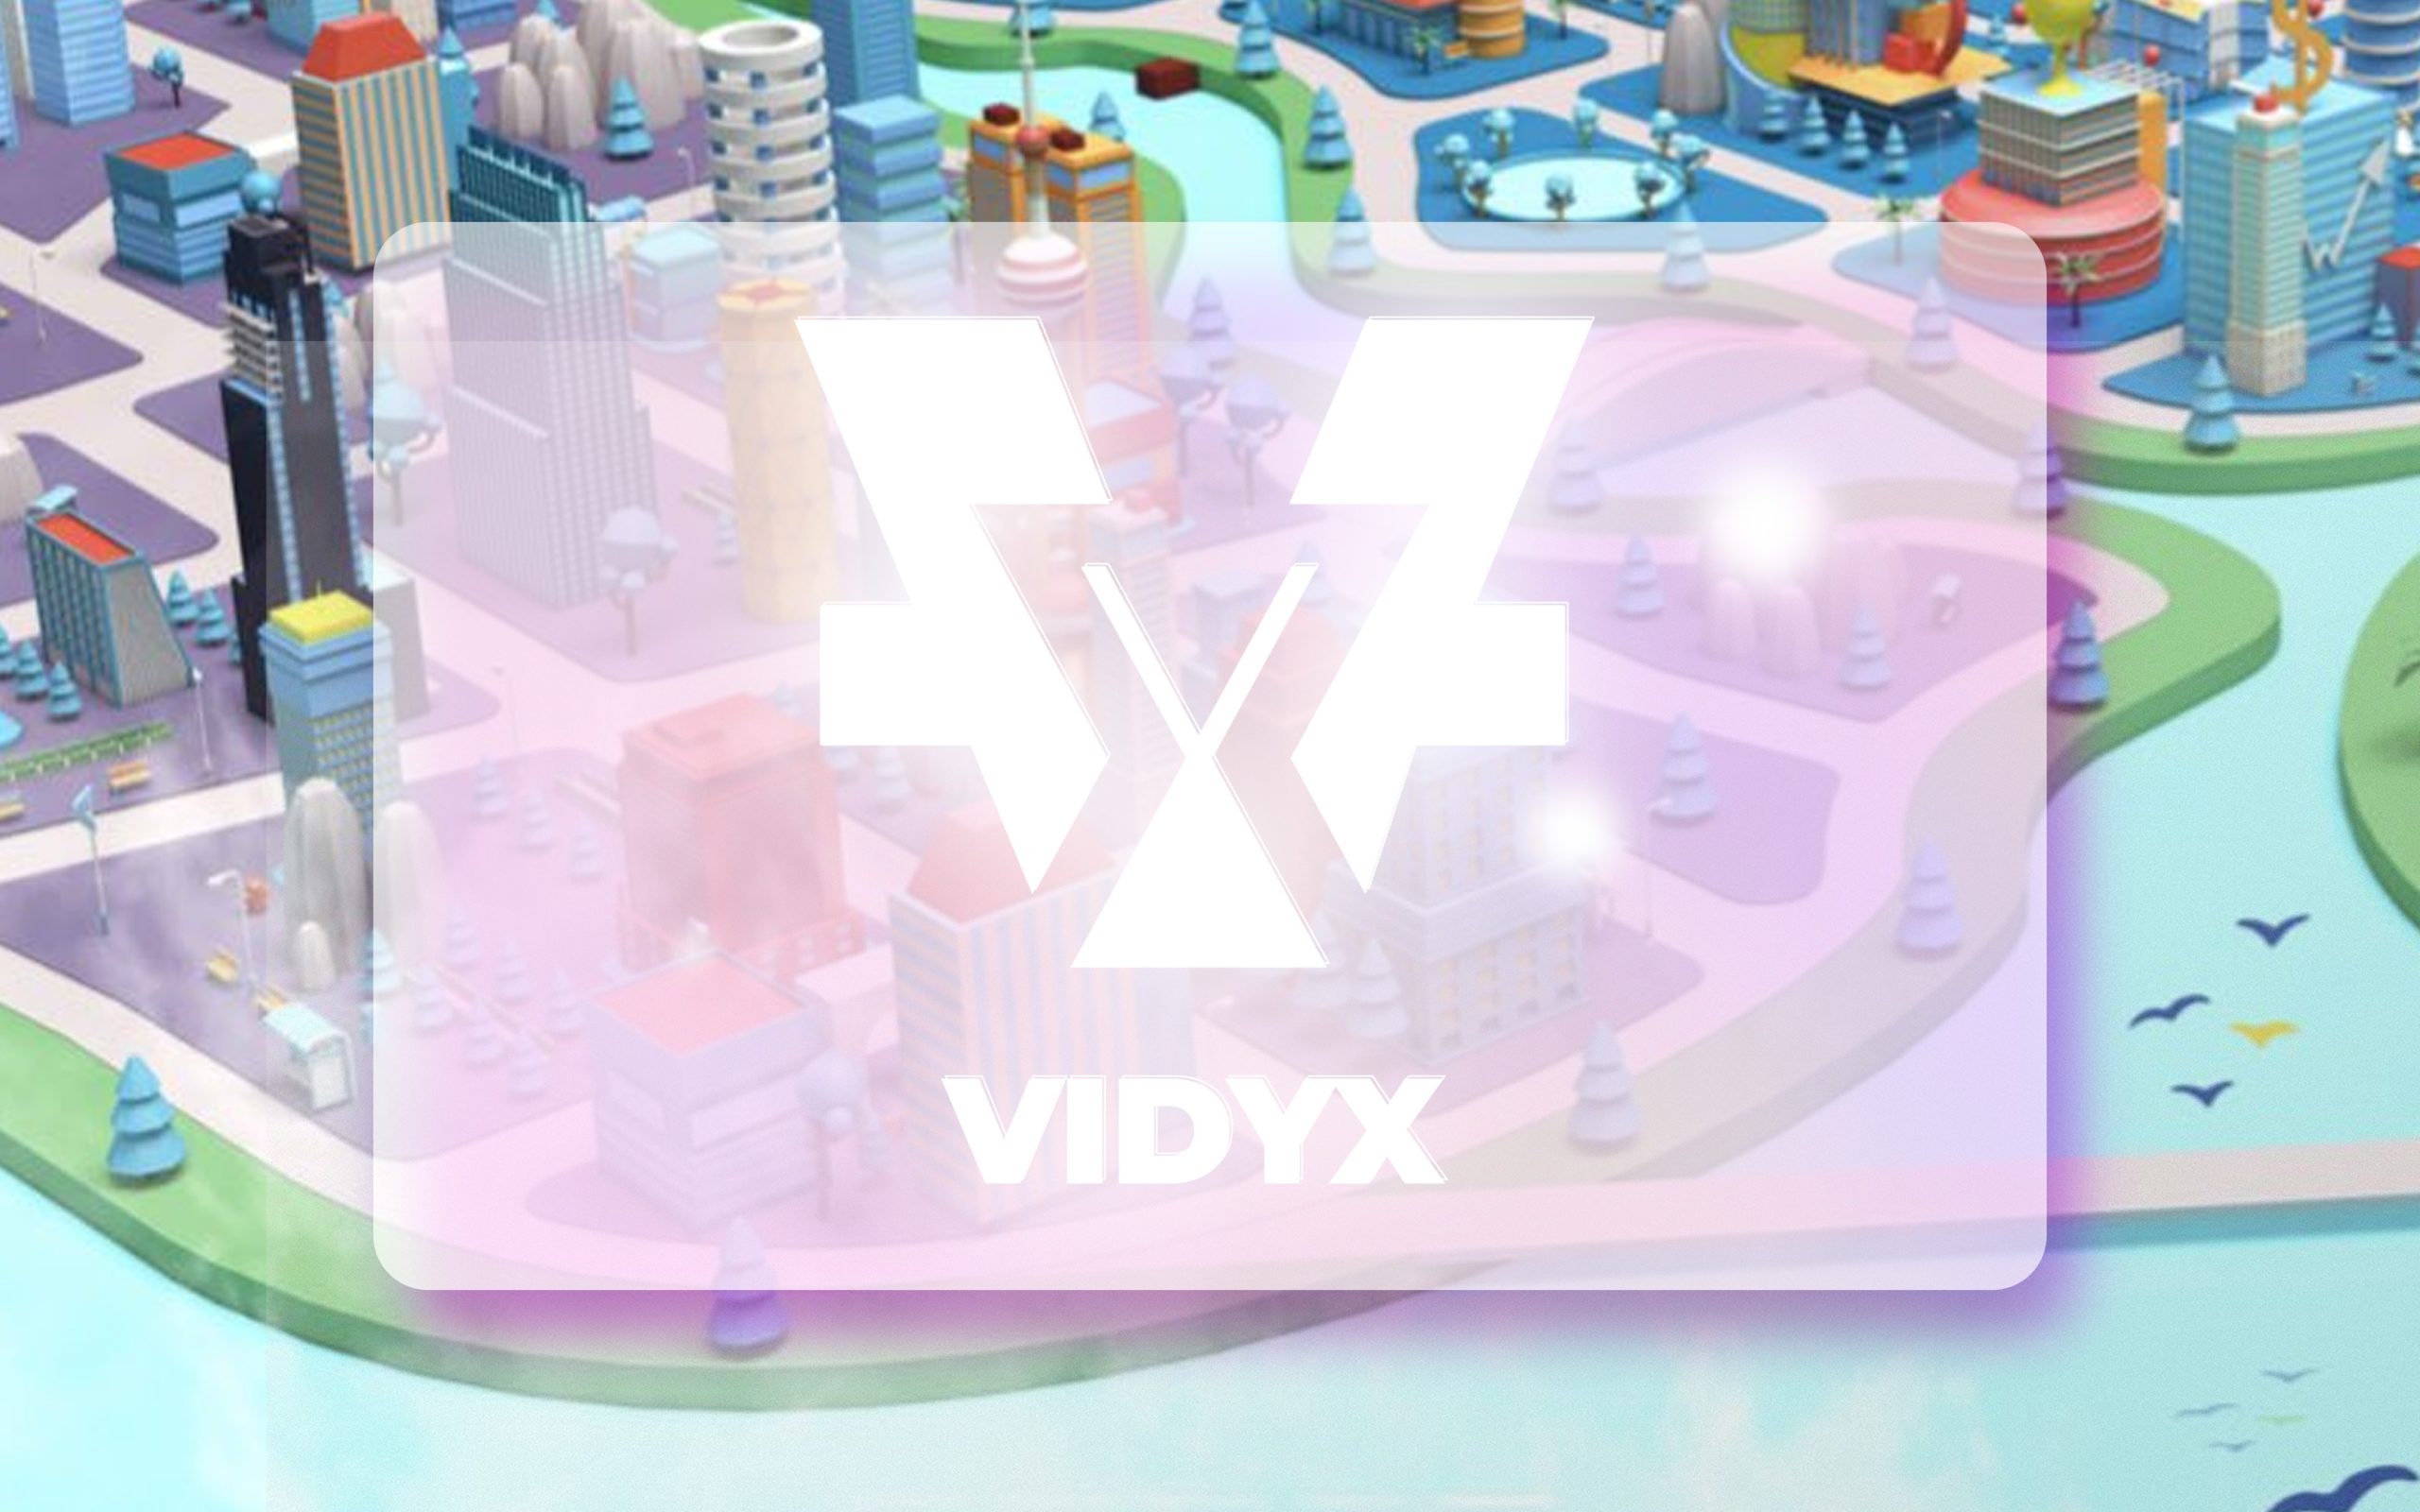 VIDYX - Top Cryptocurrency to Buy and Hold Forever